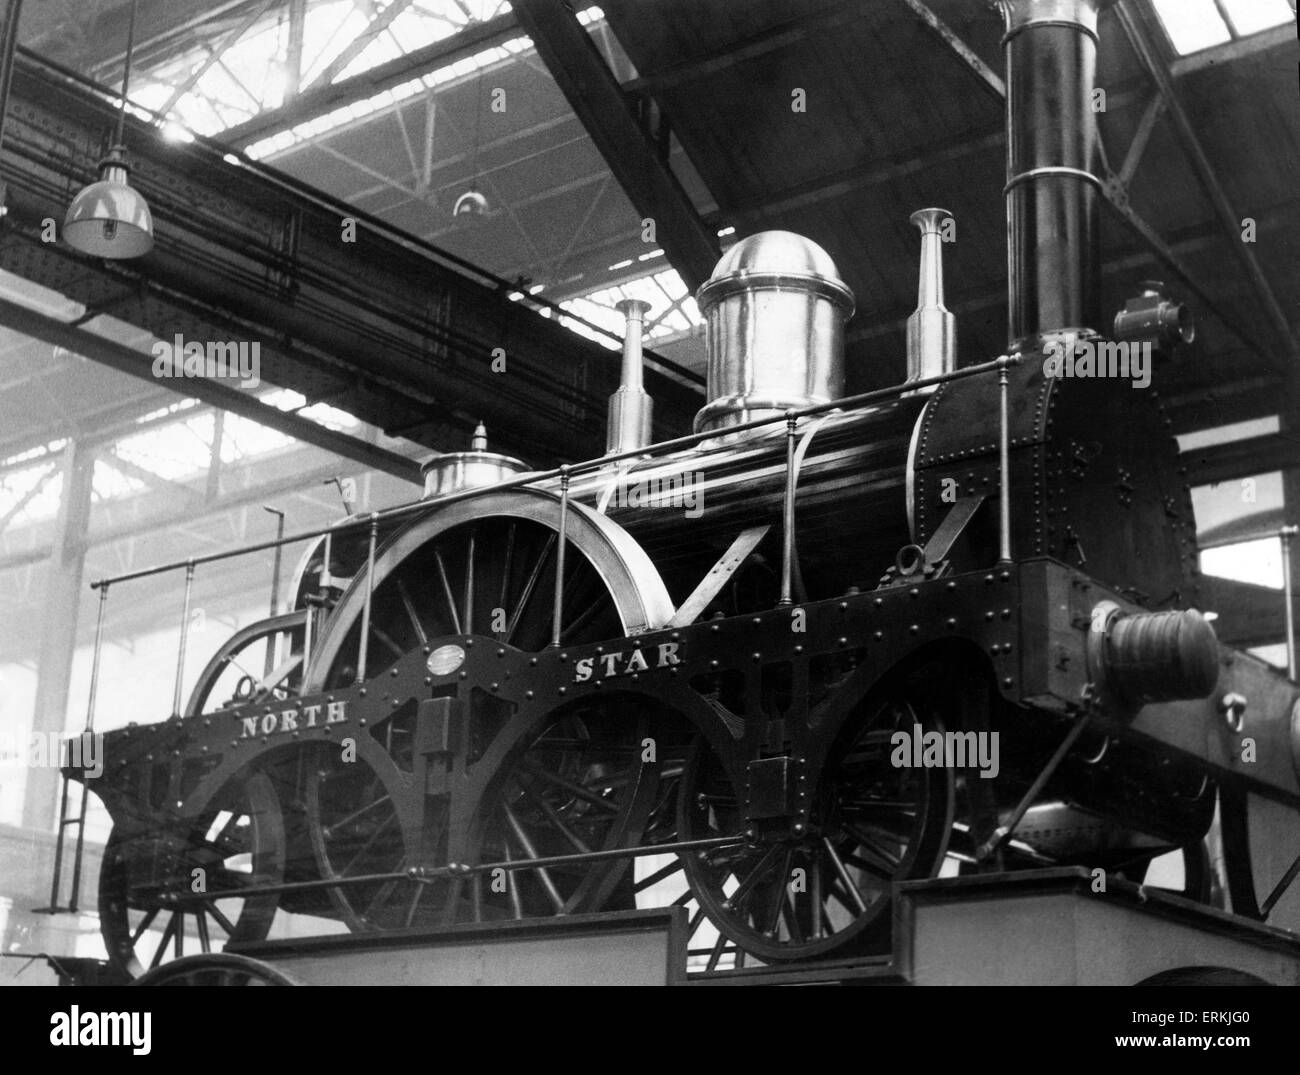 The Great Western Railway (GWR) Star Class North Star steam locomotive built by Robert Louis Stephenson in 1837, on display in Swindon. March 1960. Stock Photo